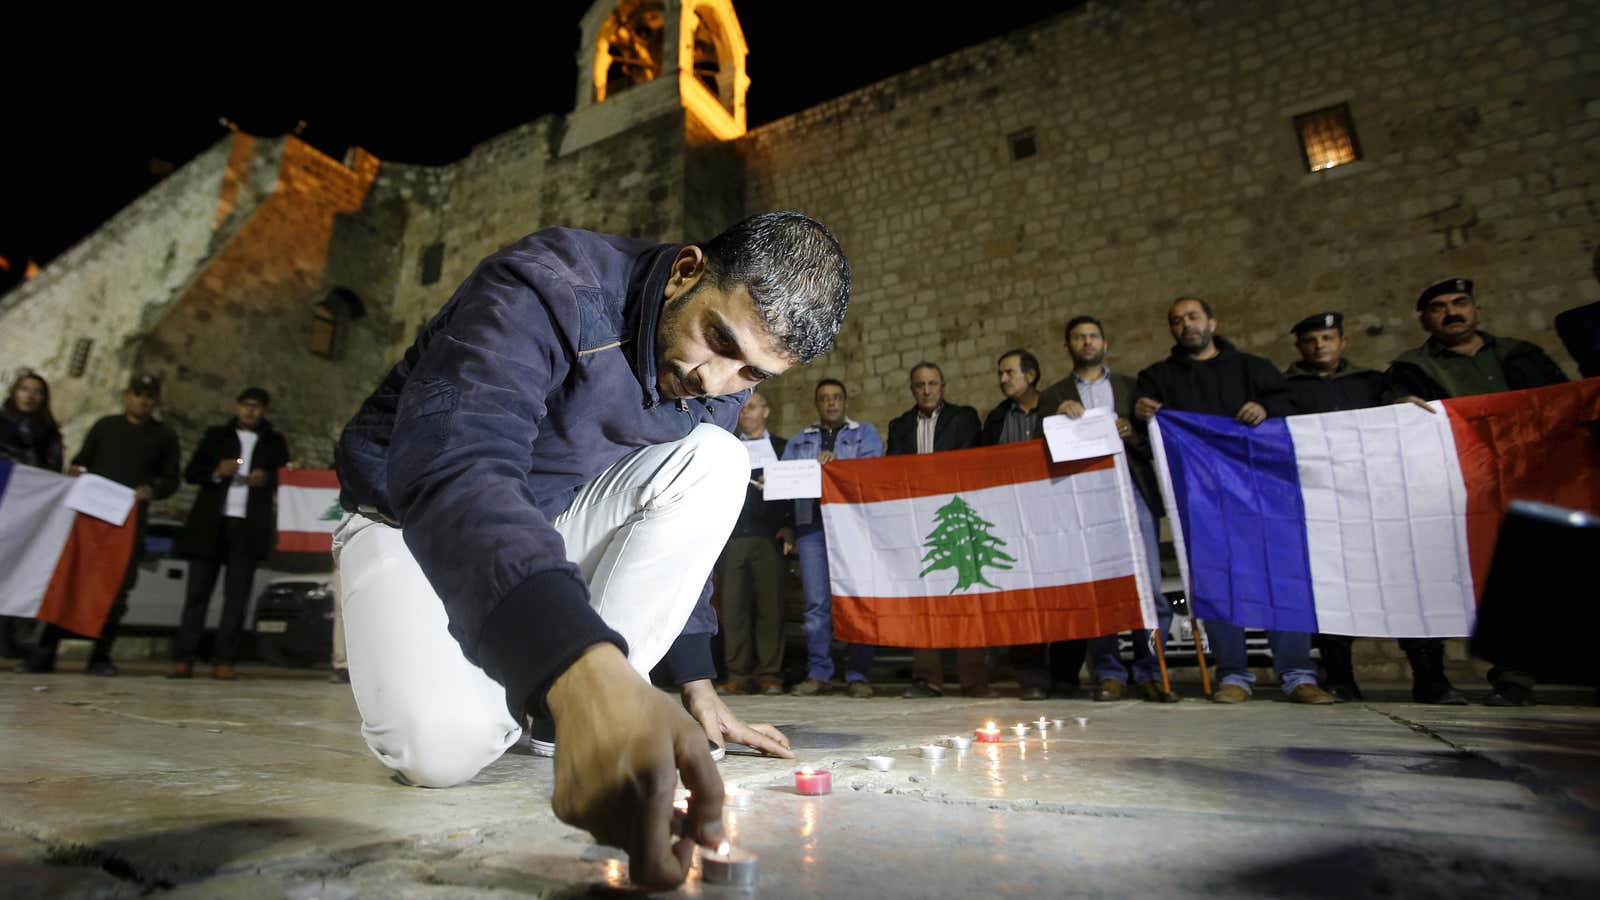 A Palestinian lights a candle  in solidarity with victims of attacks in Paris and Lebanon.